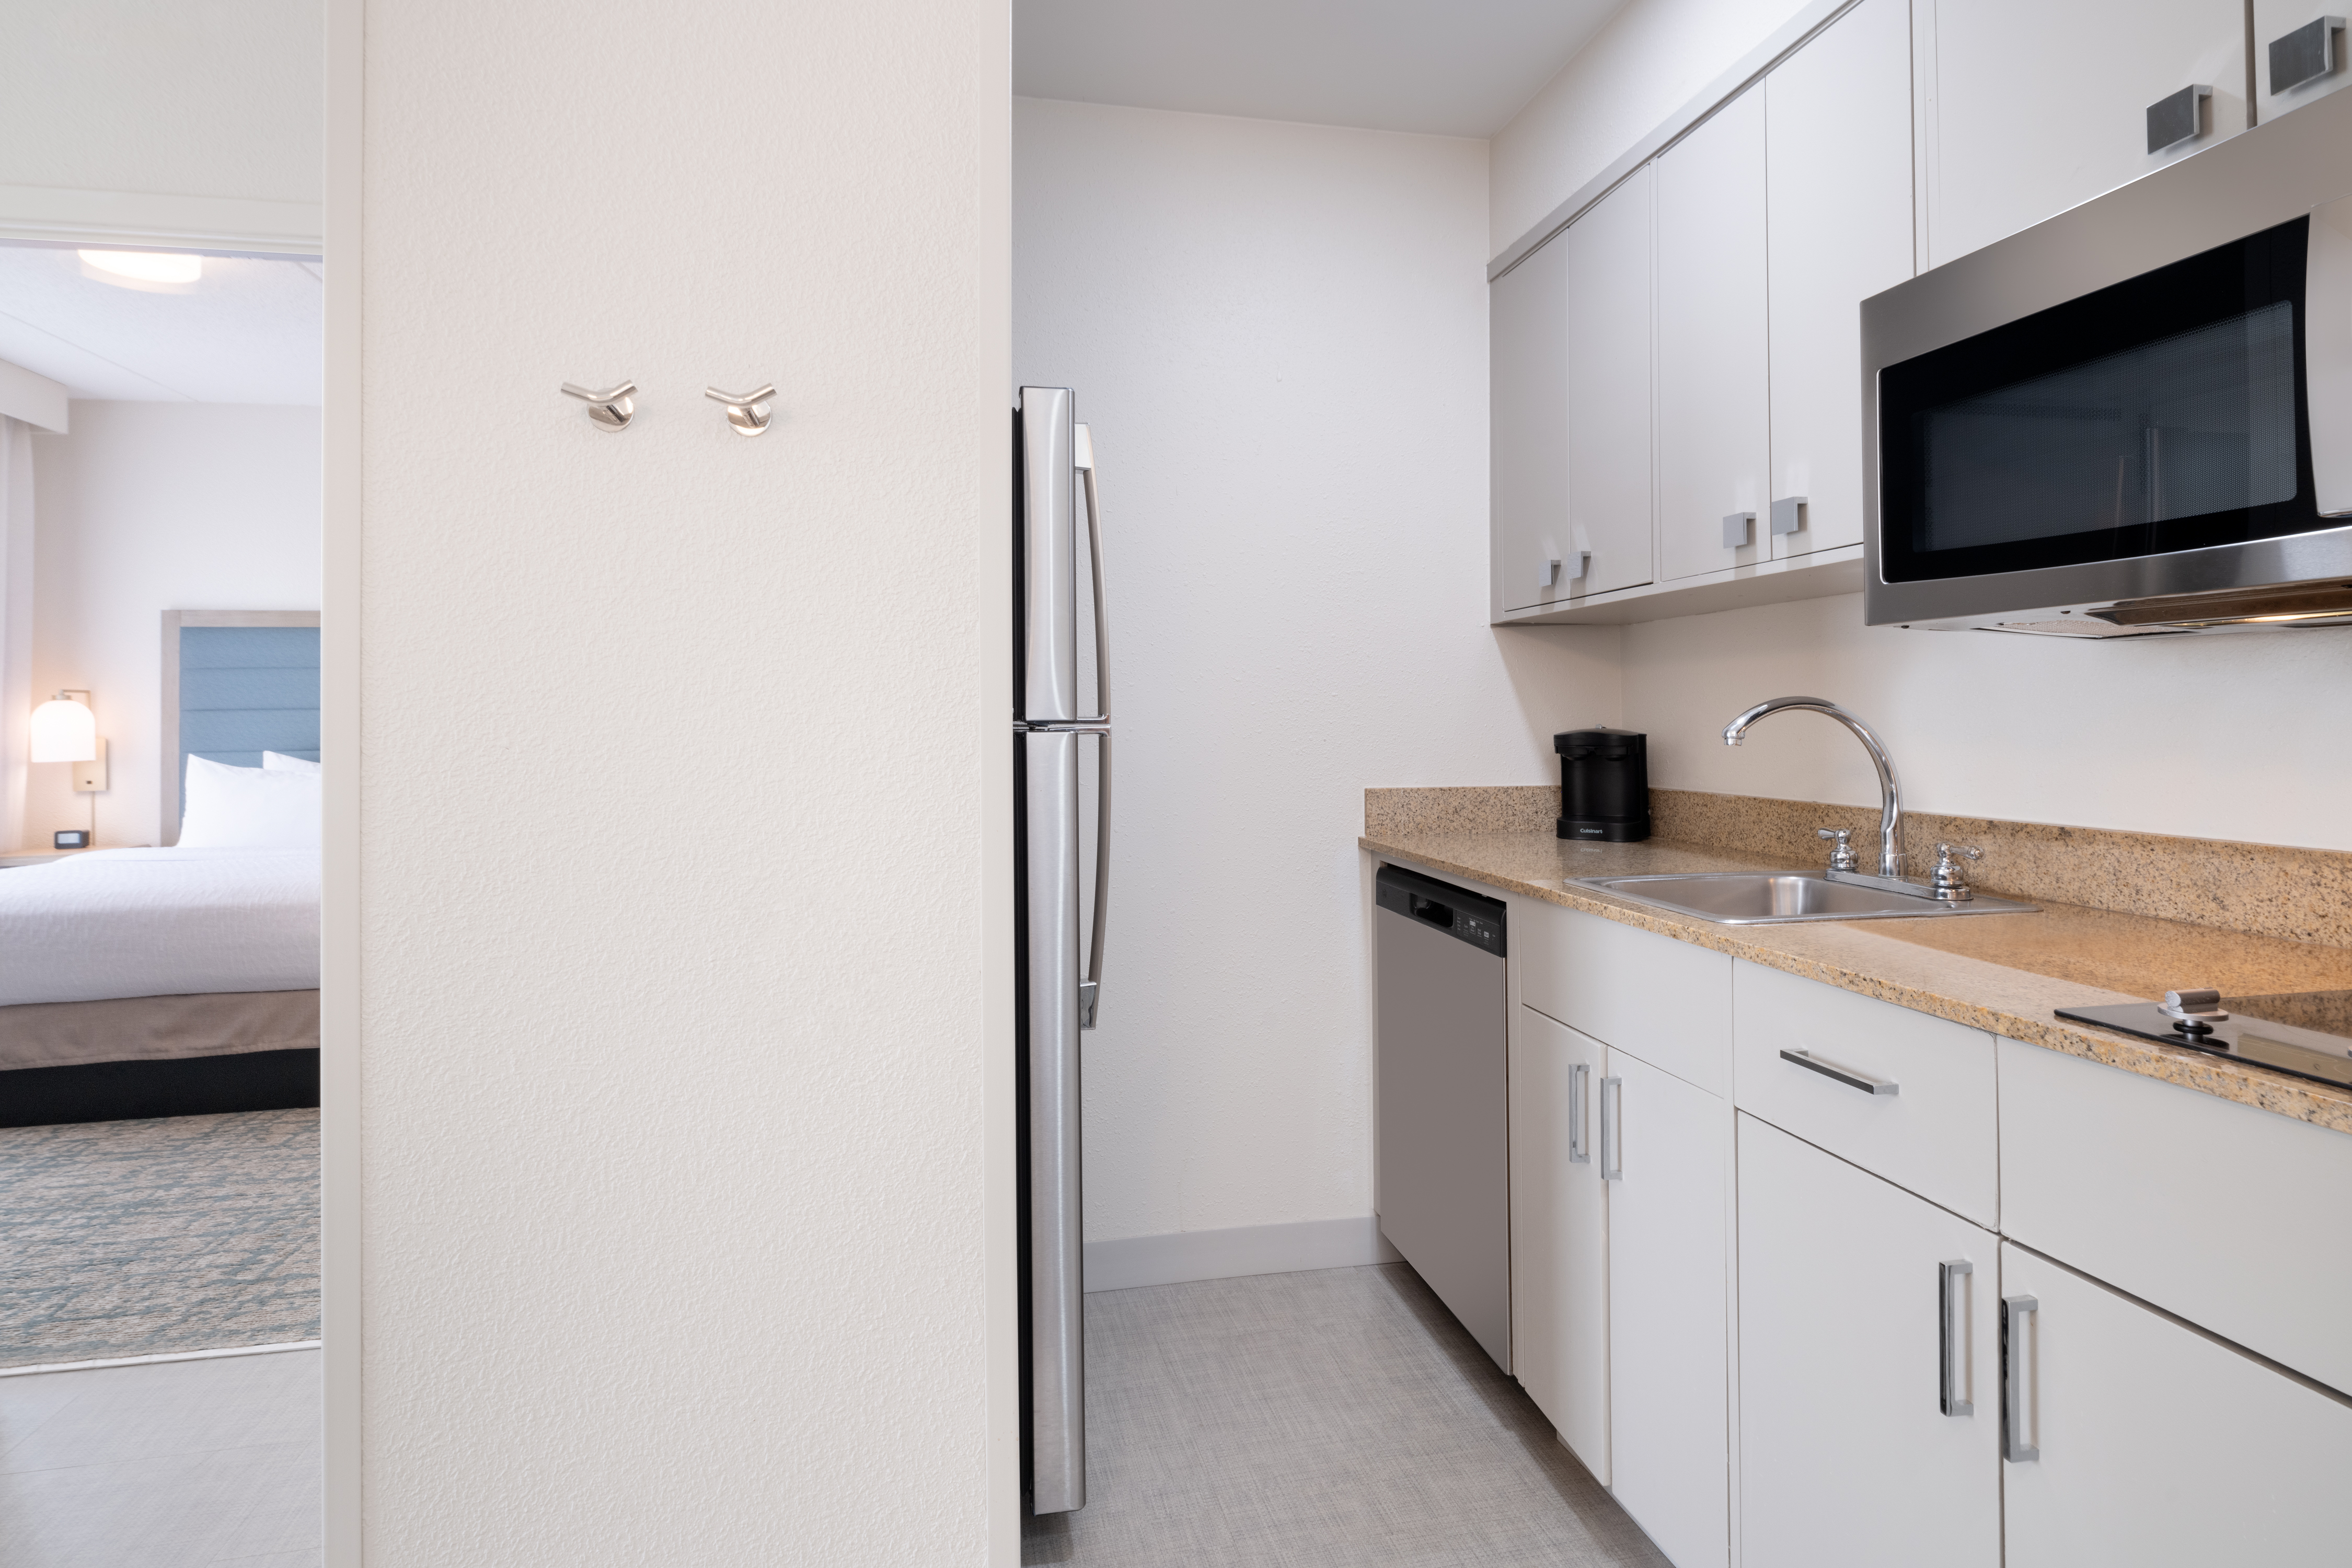 Enjoy amenities like our in-room kitchens